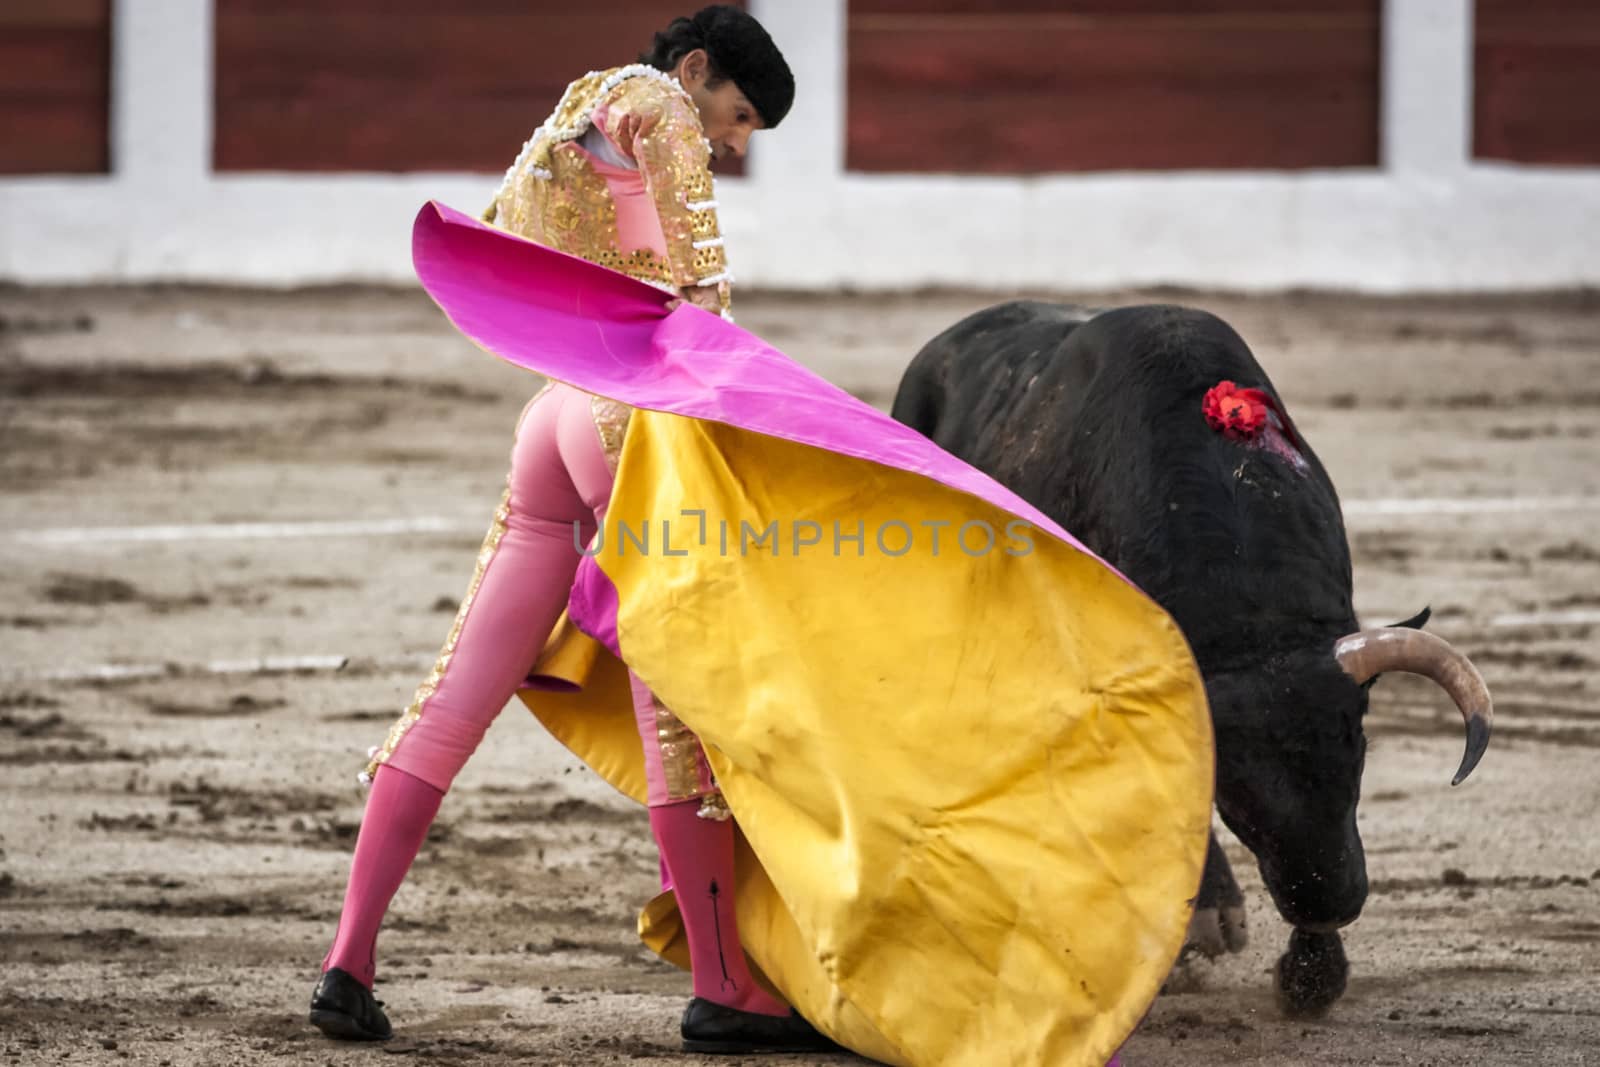 Linares, Jaen province, SPAIN - 28 august 2011: Spanish bullfighter Manuel Jesus El Cid with the capote or cape bullfighting a bull of nearly 600 kg of black ash during a bullfight held in Linares, Jaen province, Spain, 28 august 2011